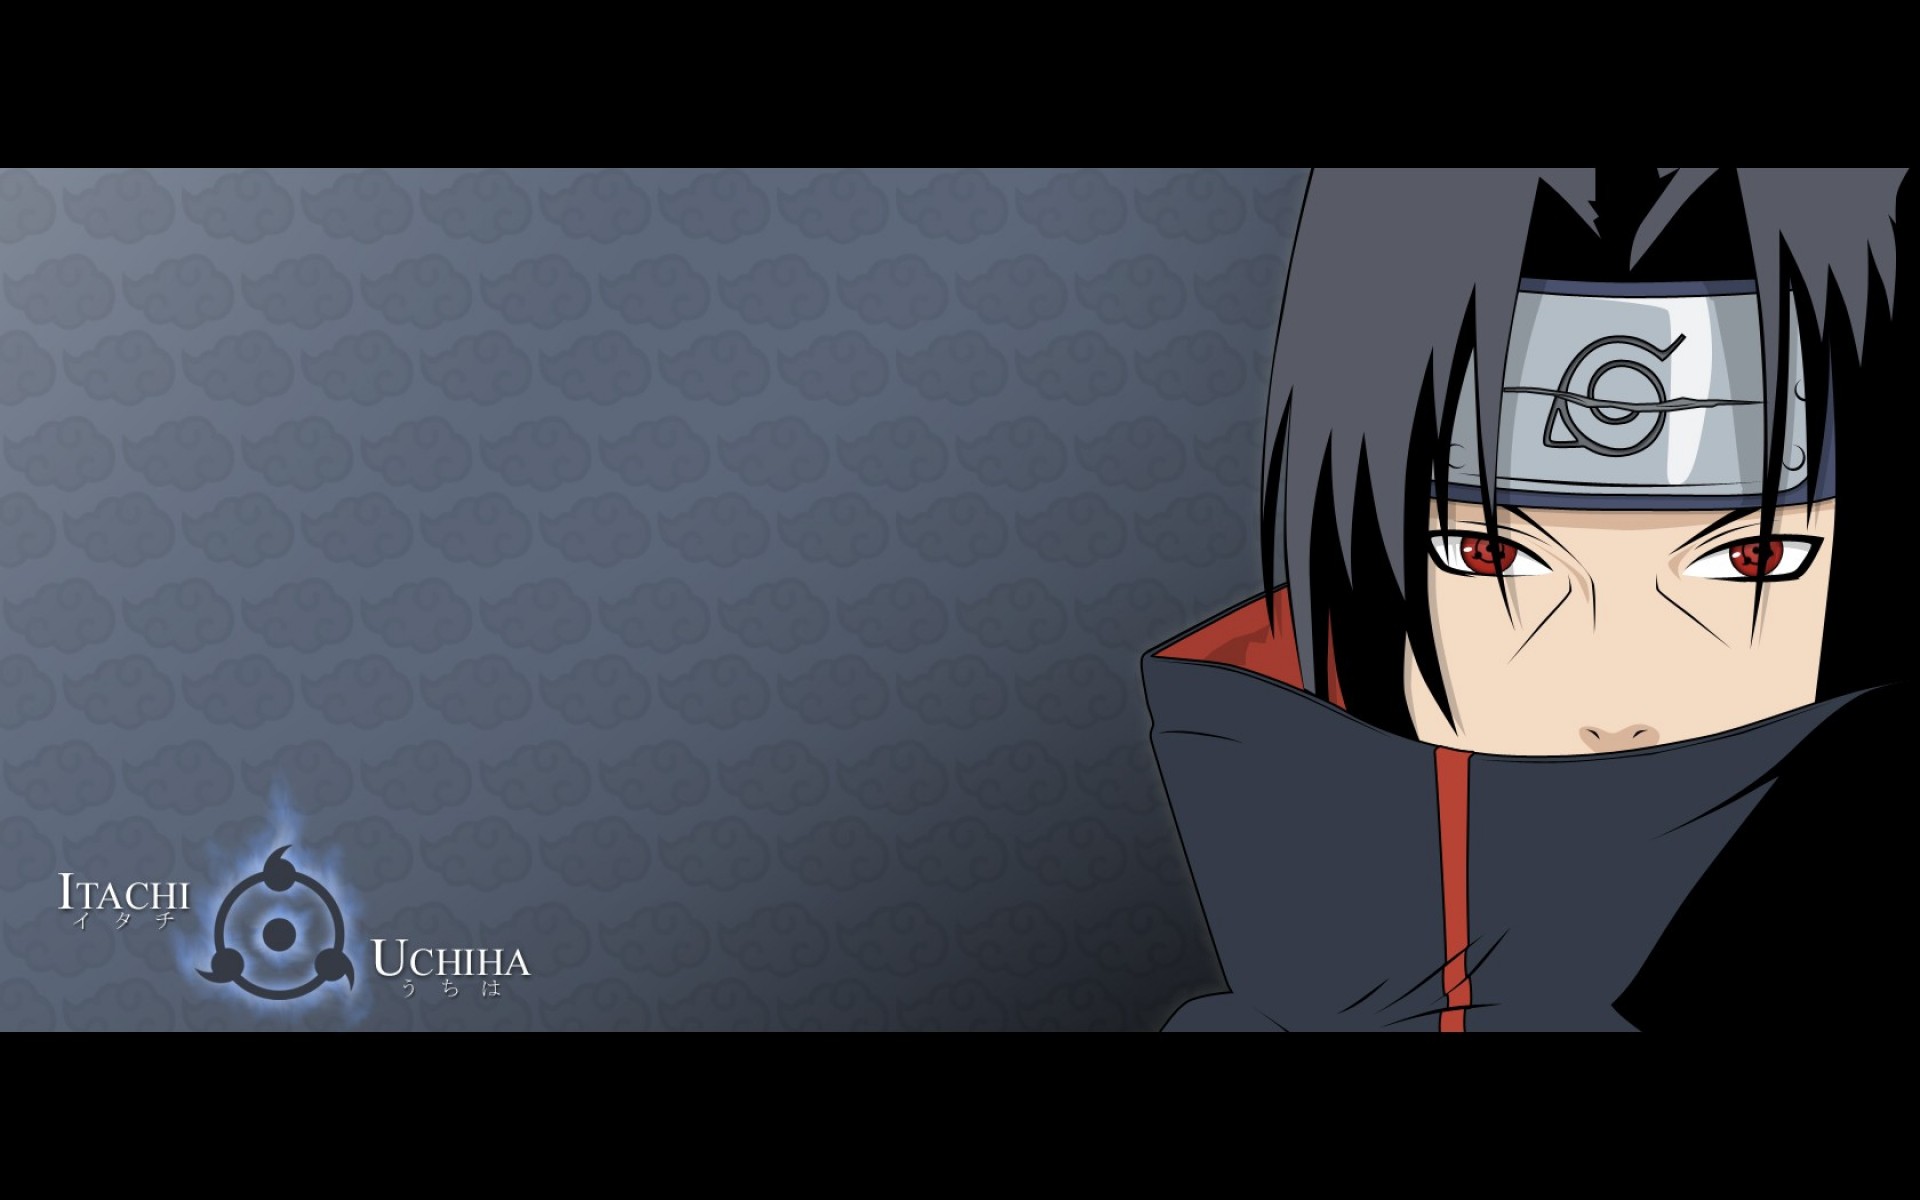 Page 3 Of Itachi 4k Wallpapers For Your Desktop Or Mobile Screen